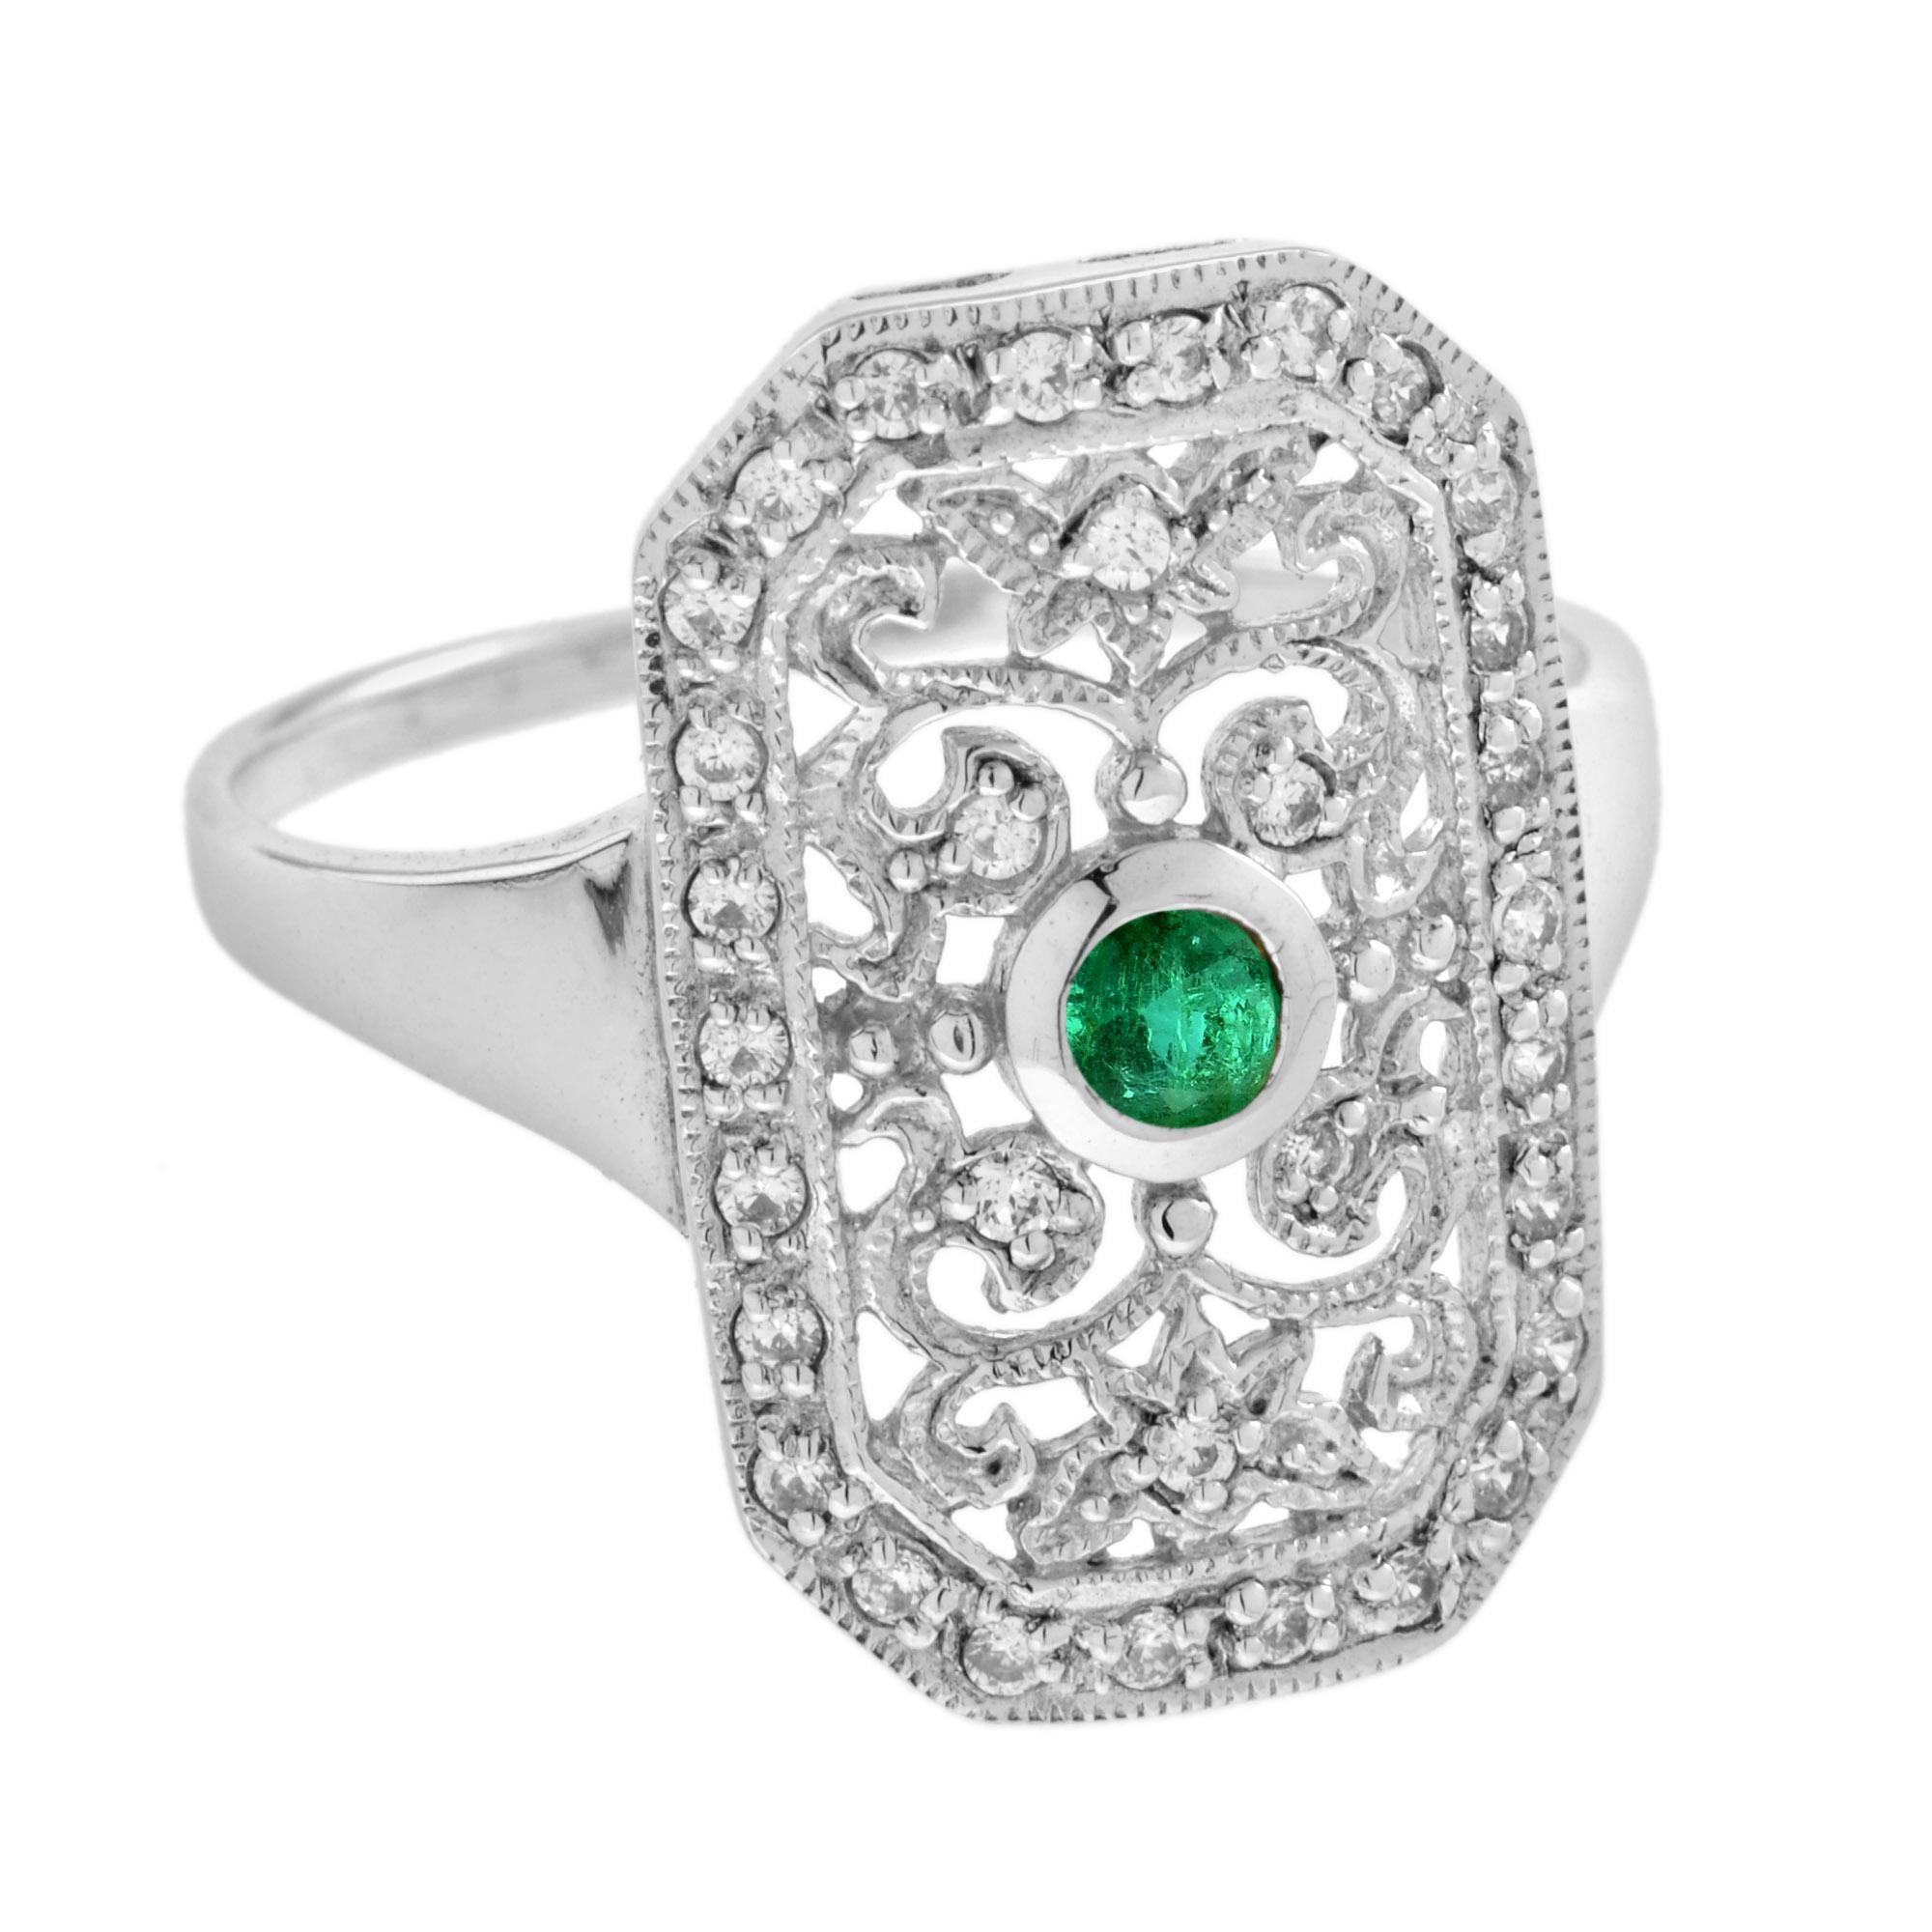 For Sale:  Emerald and Diamond Vintage Style Filigree Ring in 14K White Gold 2